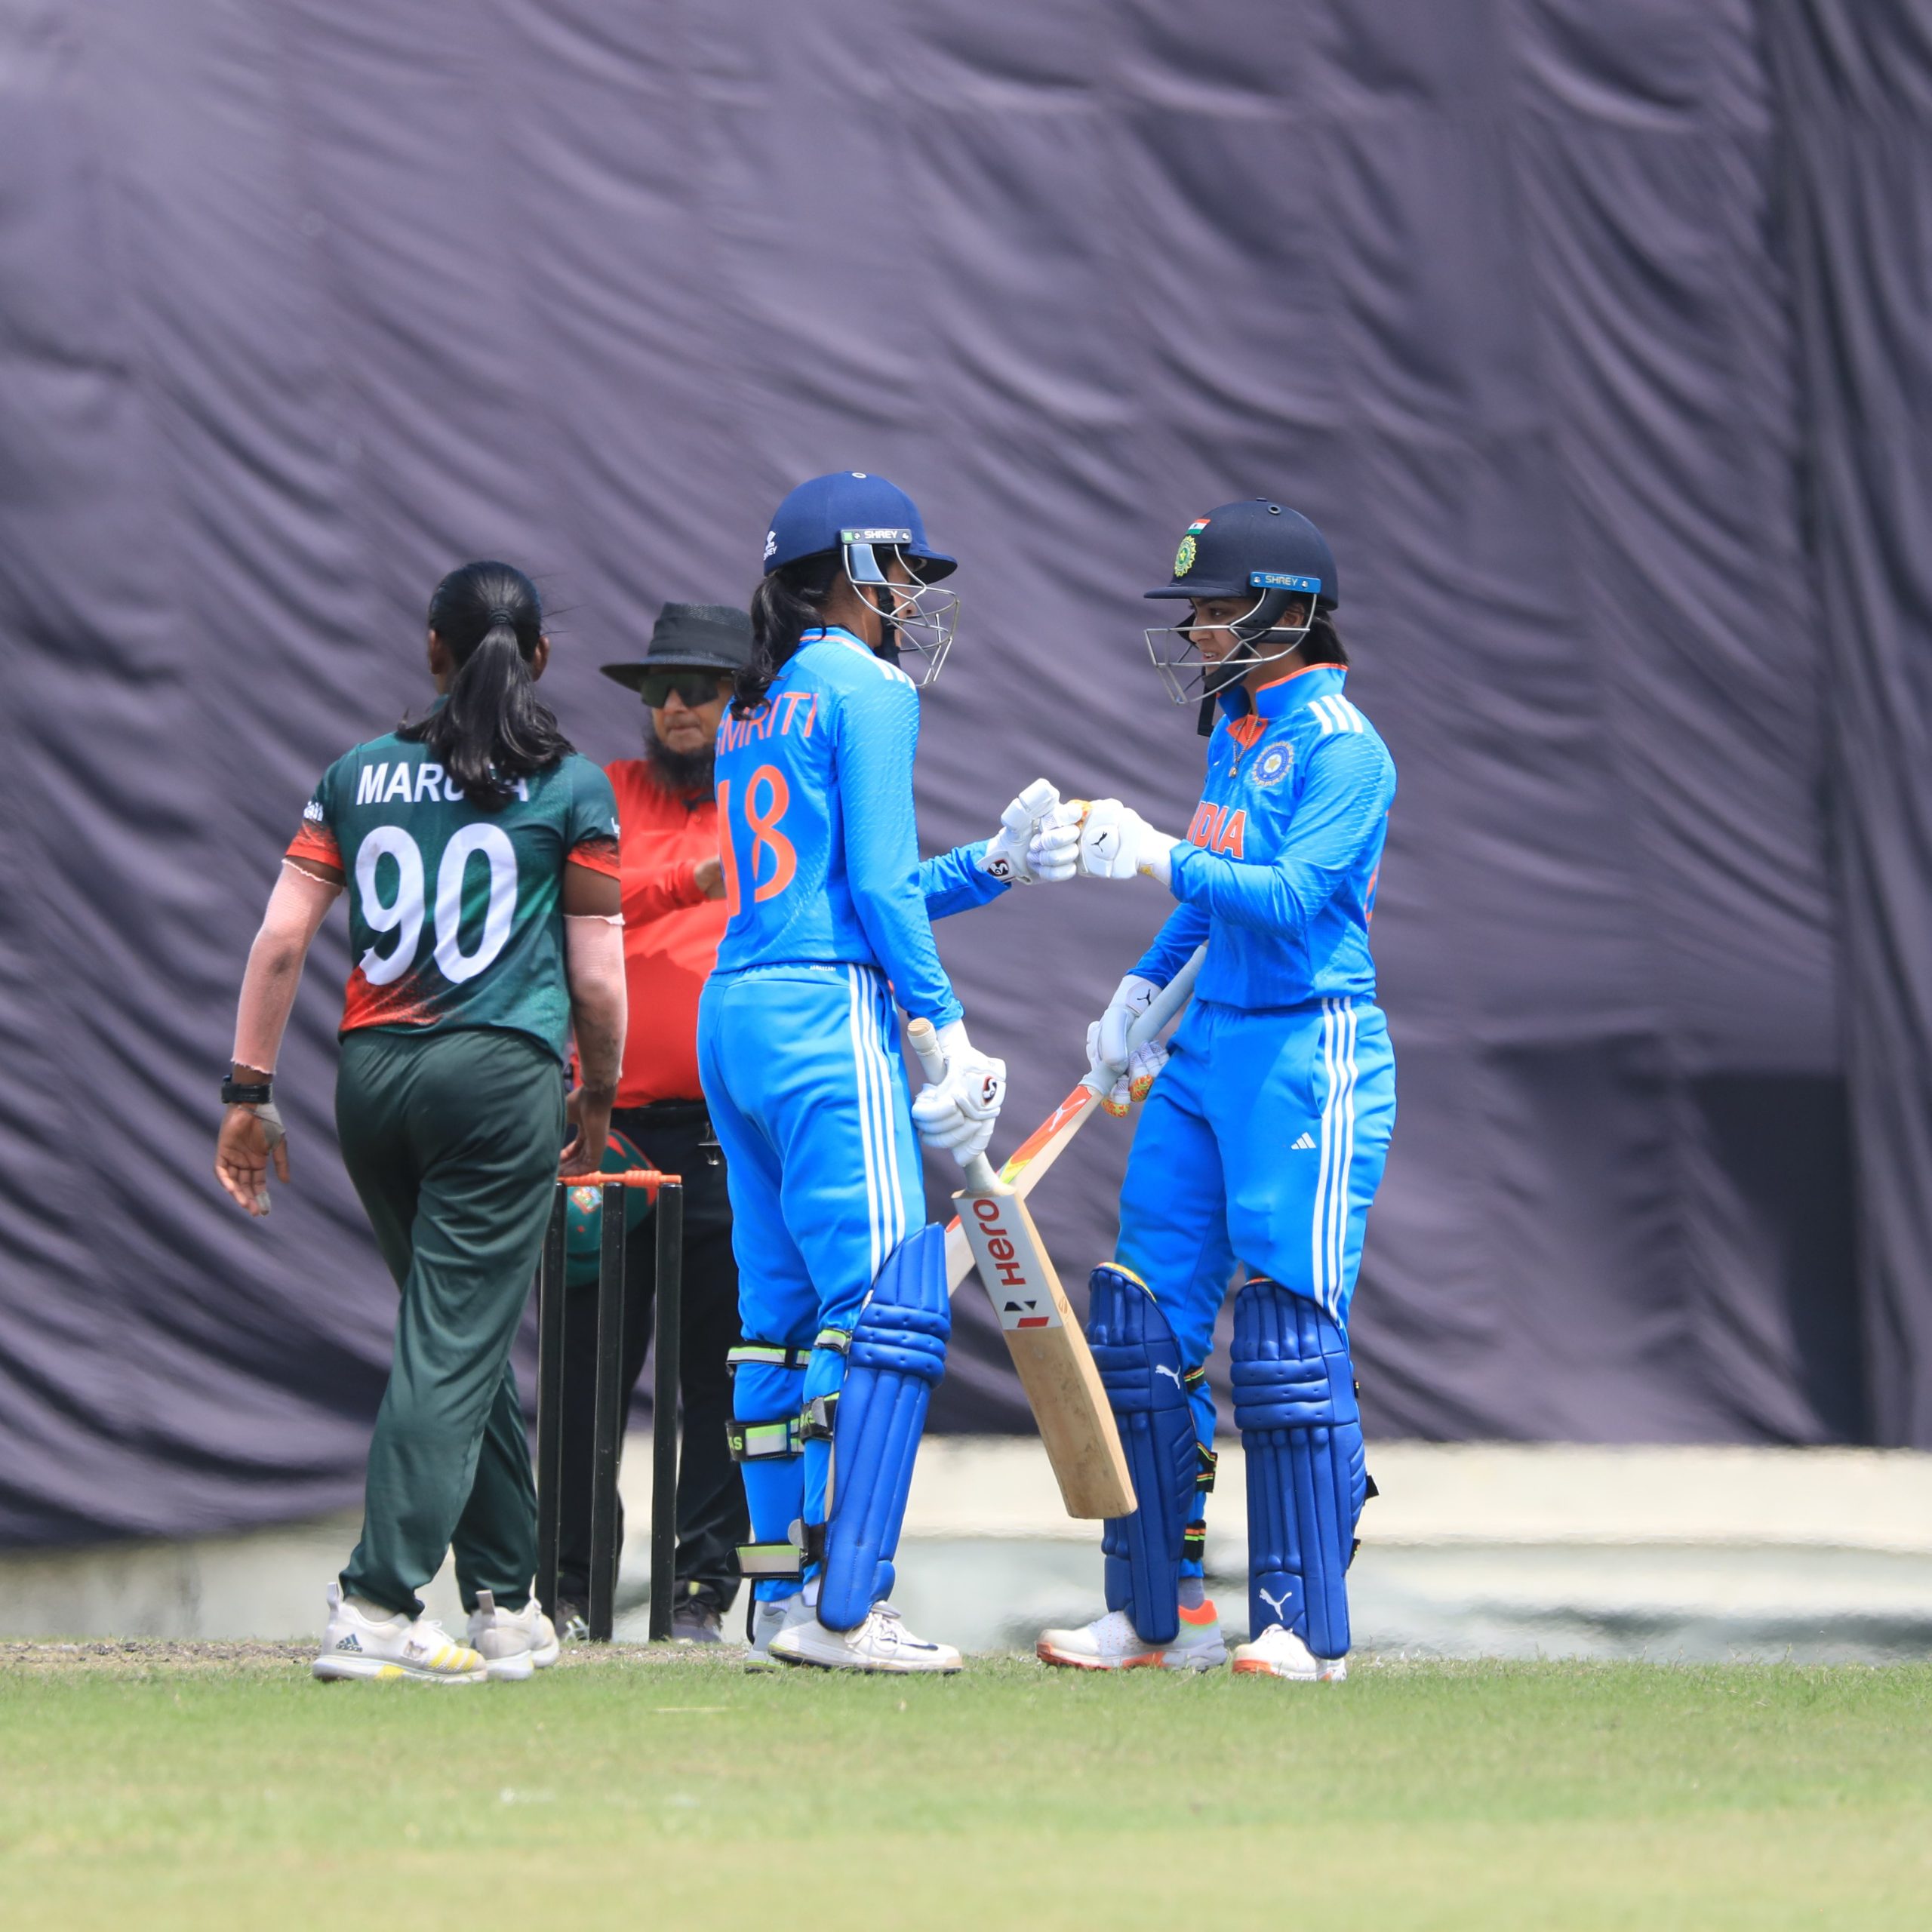 Harleen Deol and Smriti Mandhana did well in the middle. (Image: Twitter)